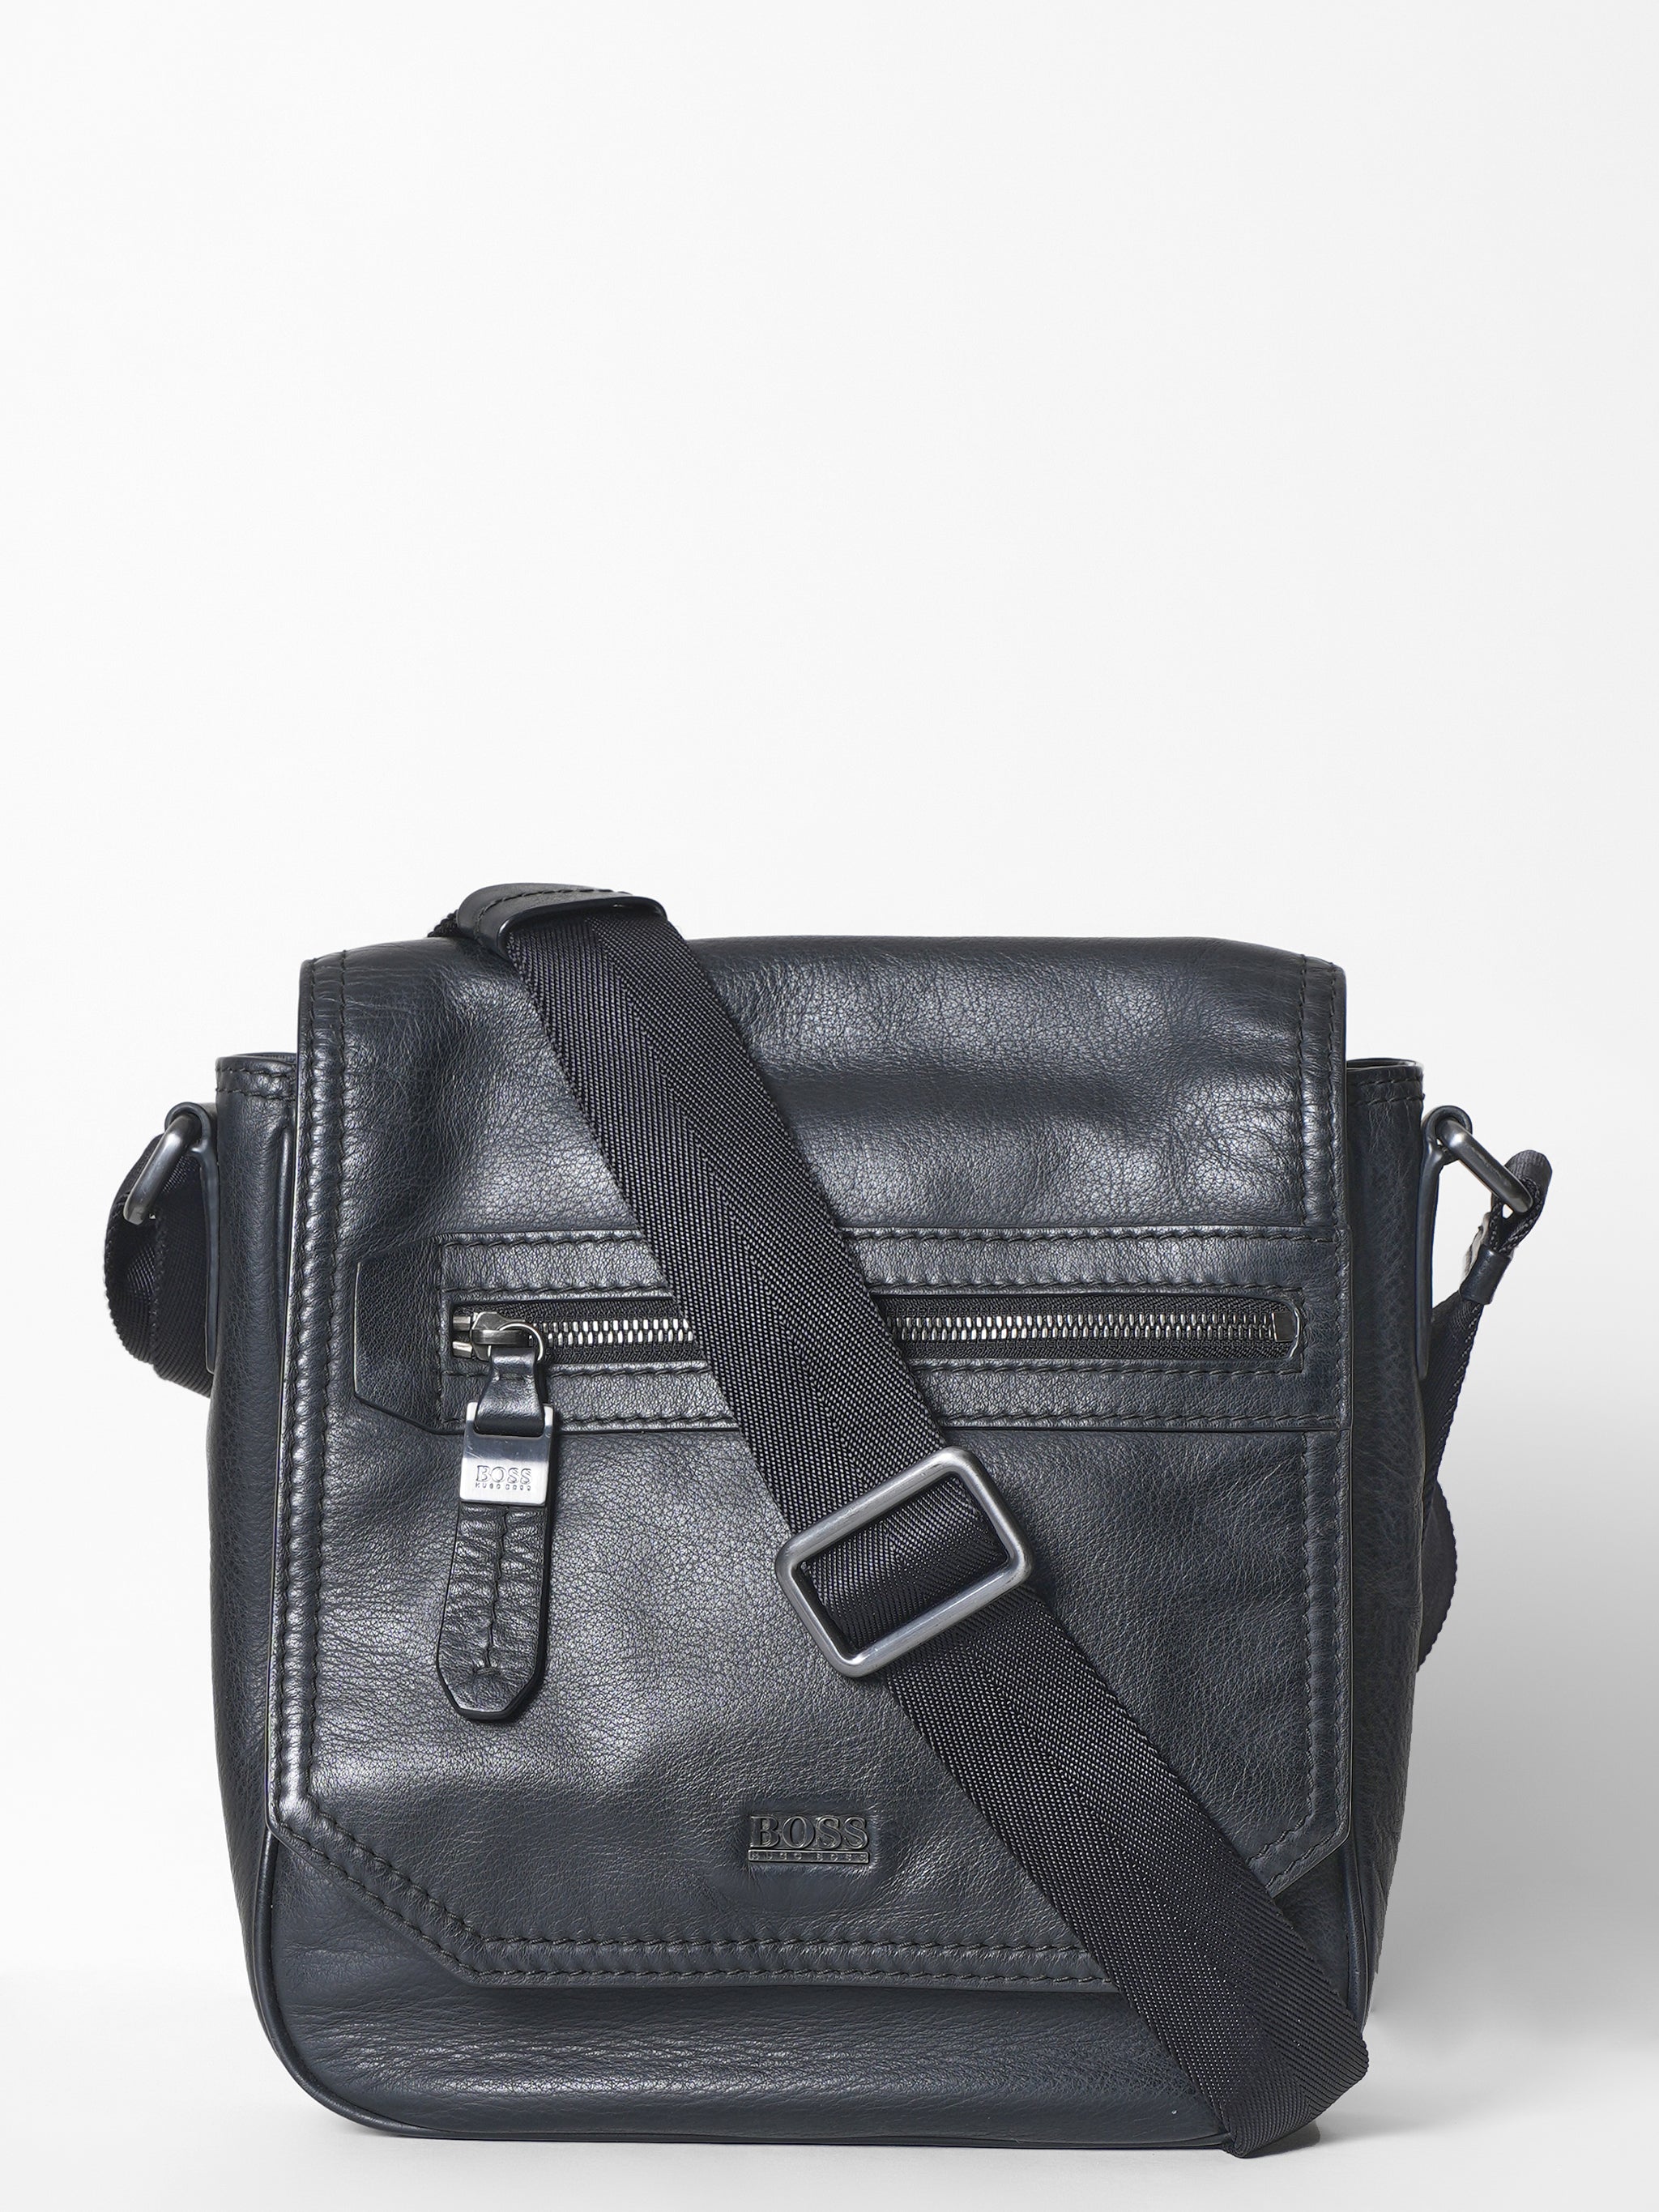 Best Bags for Men - Mens Style Guide - Macy's